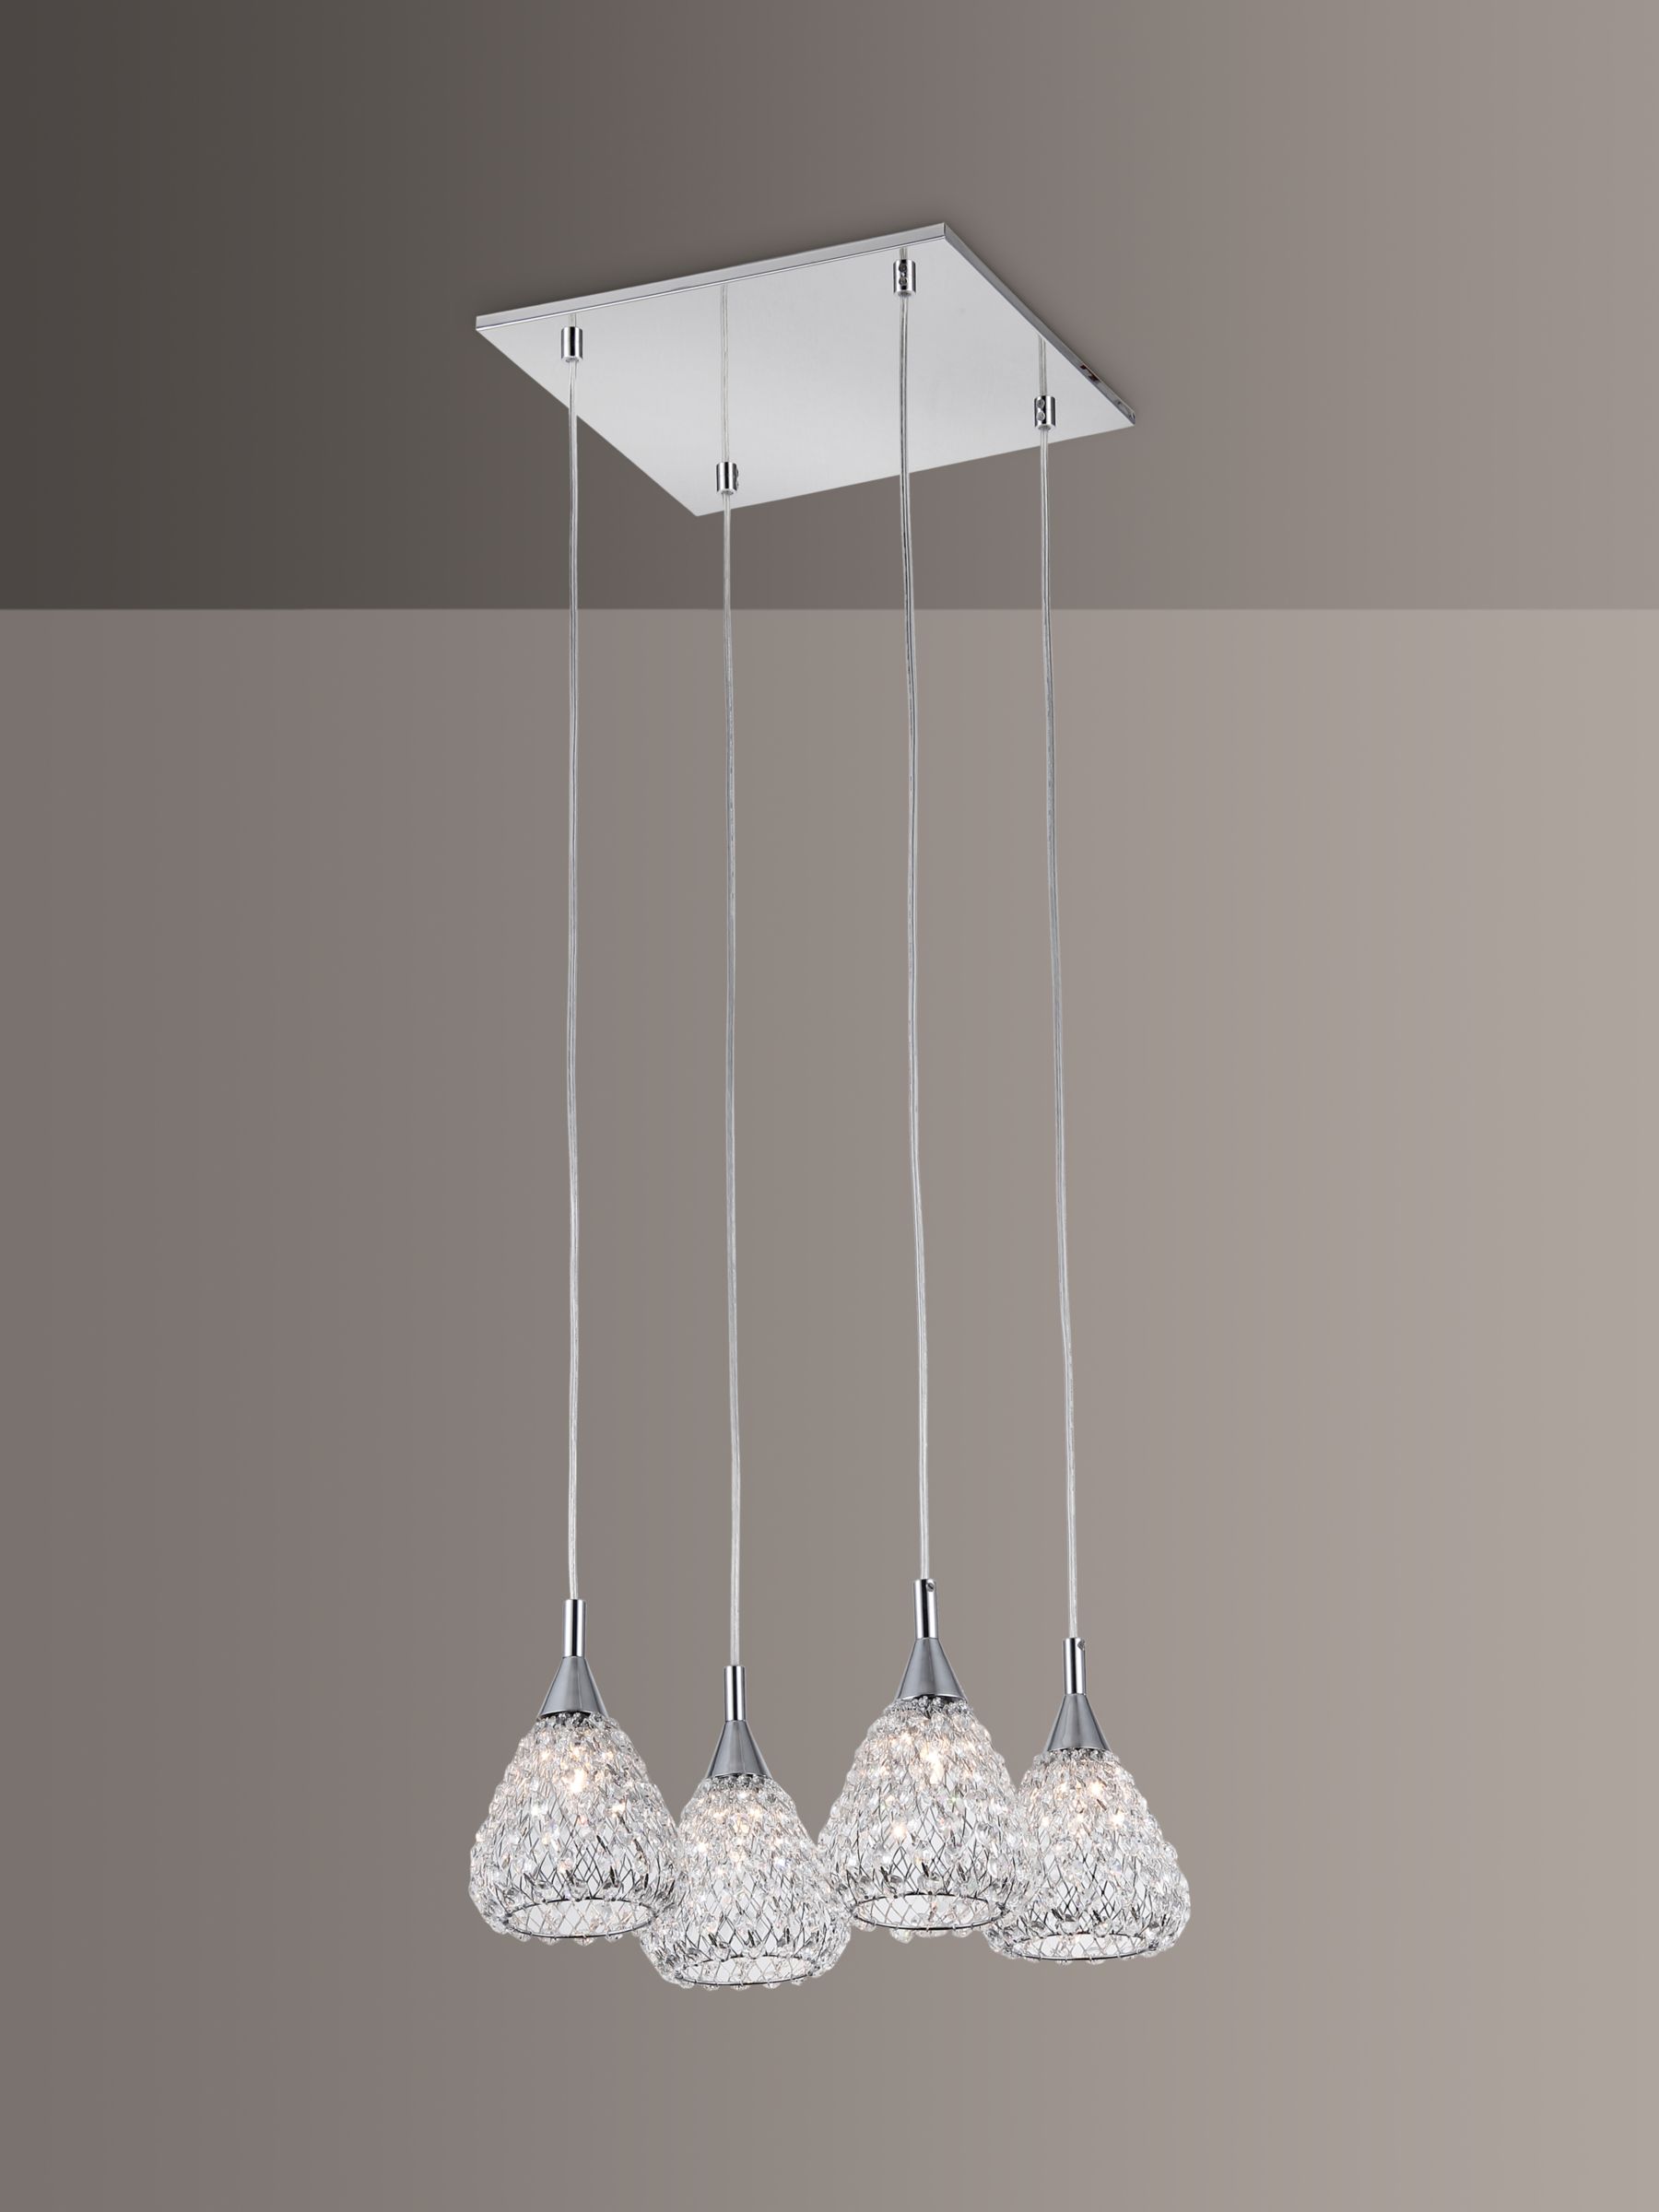 Photo of Impex simone 4 crystal pendant ceiling light clear/chrome